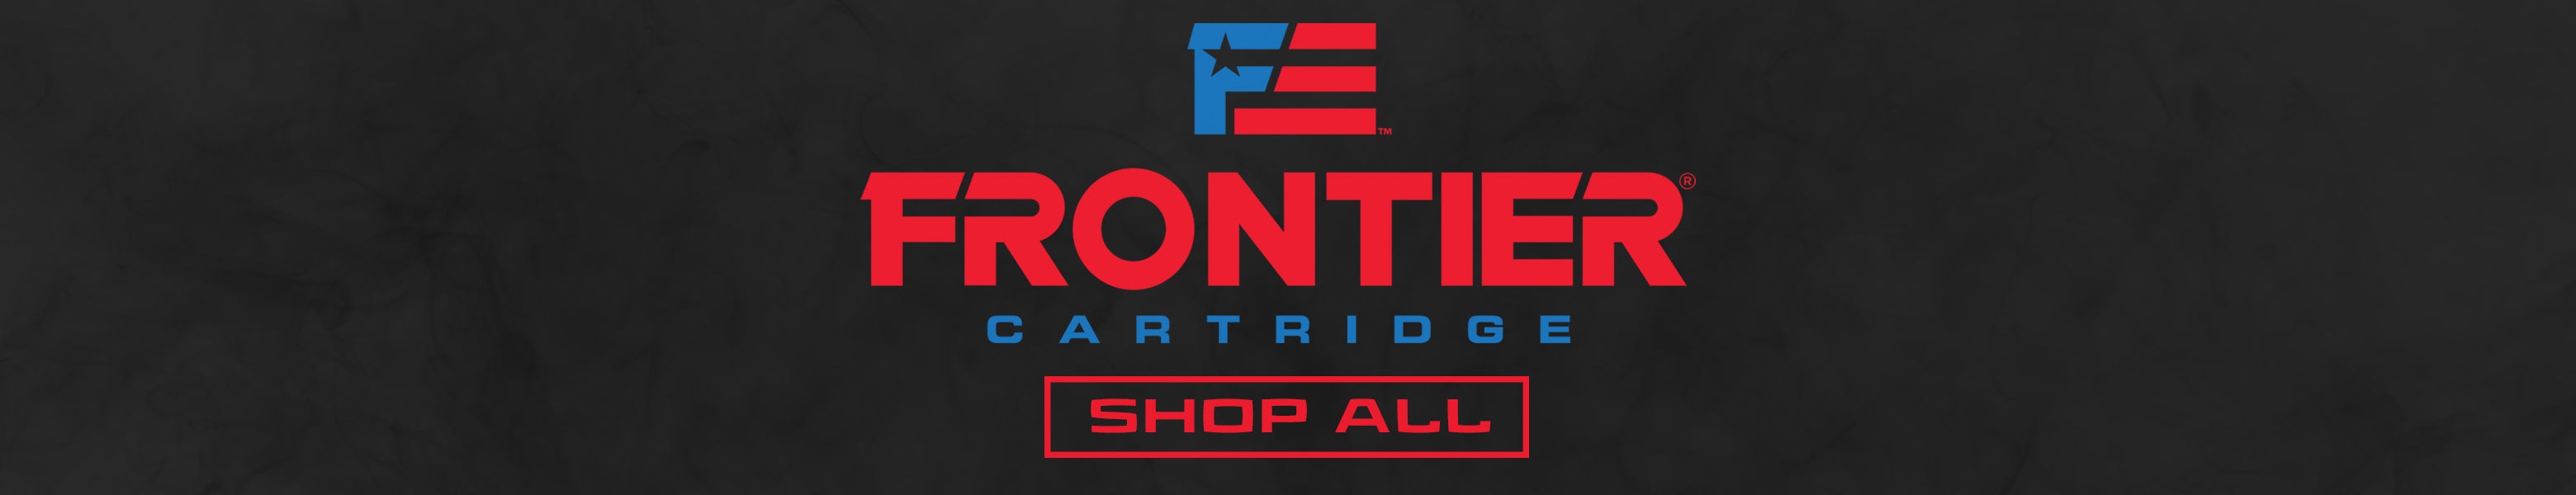 Frontier Cartridge Shop All Footer